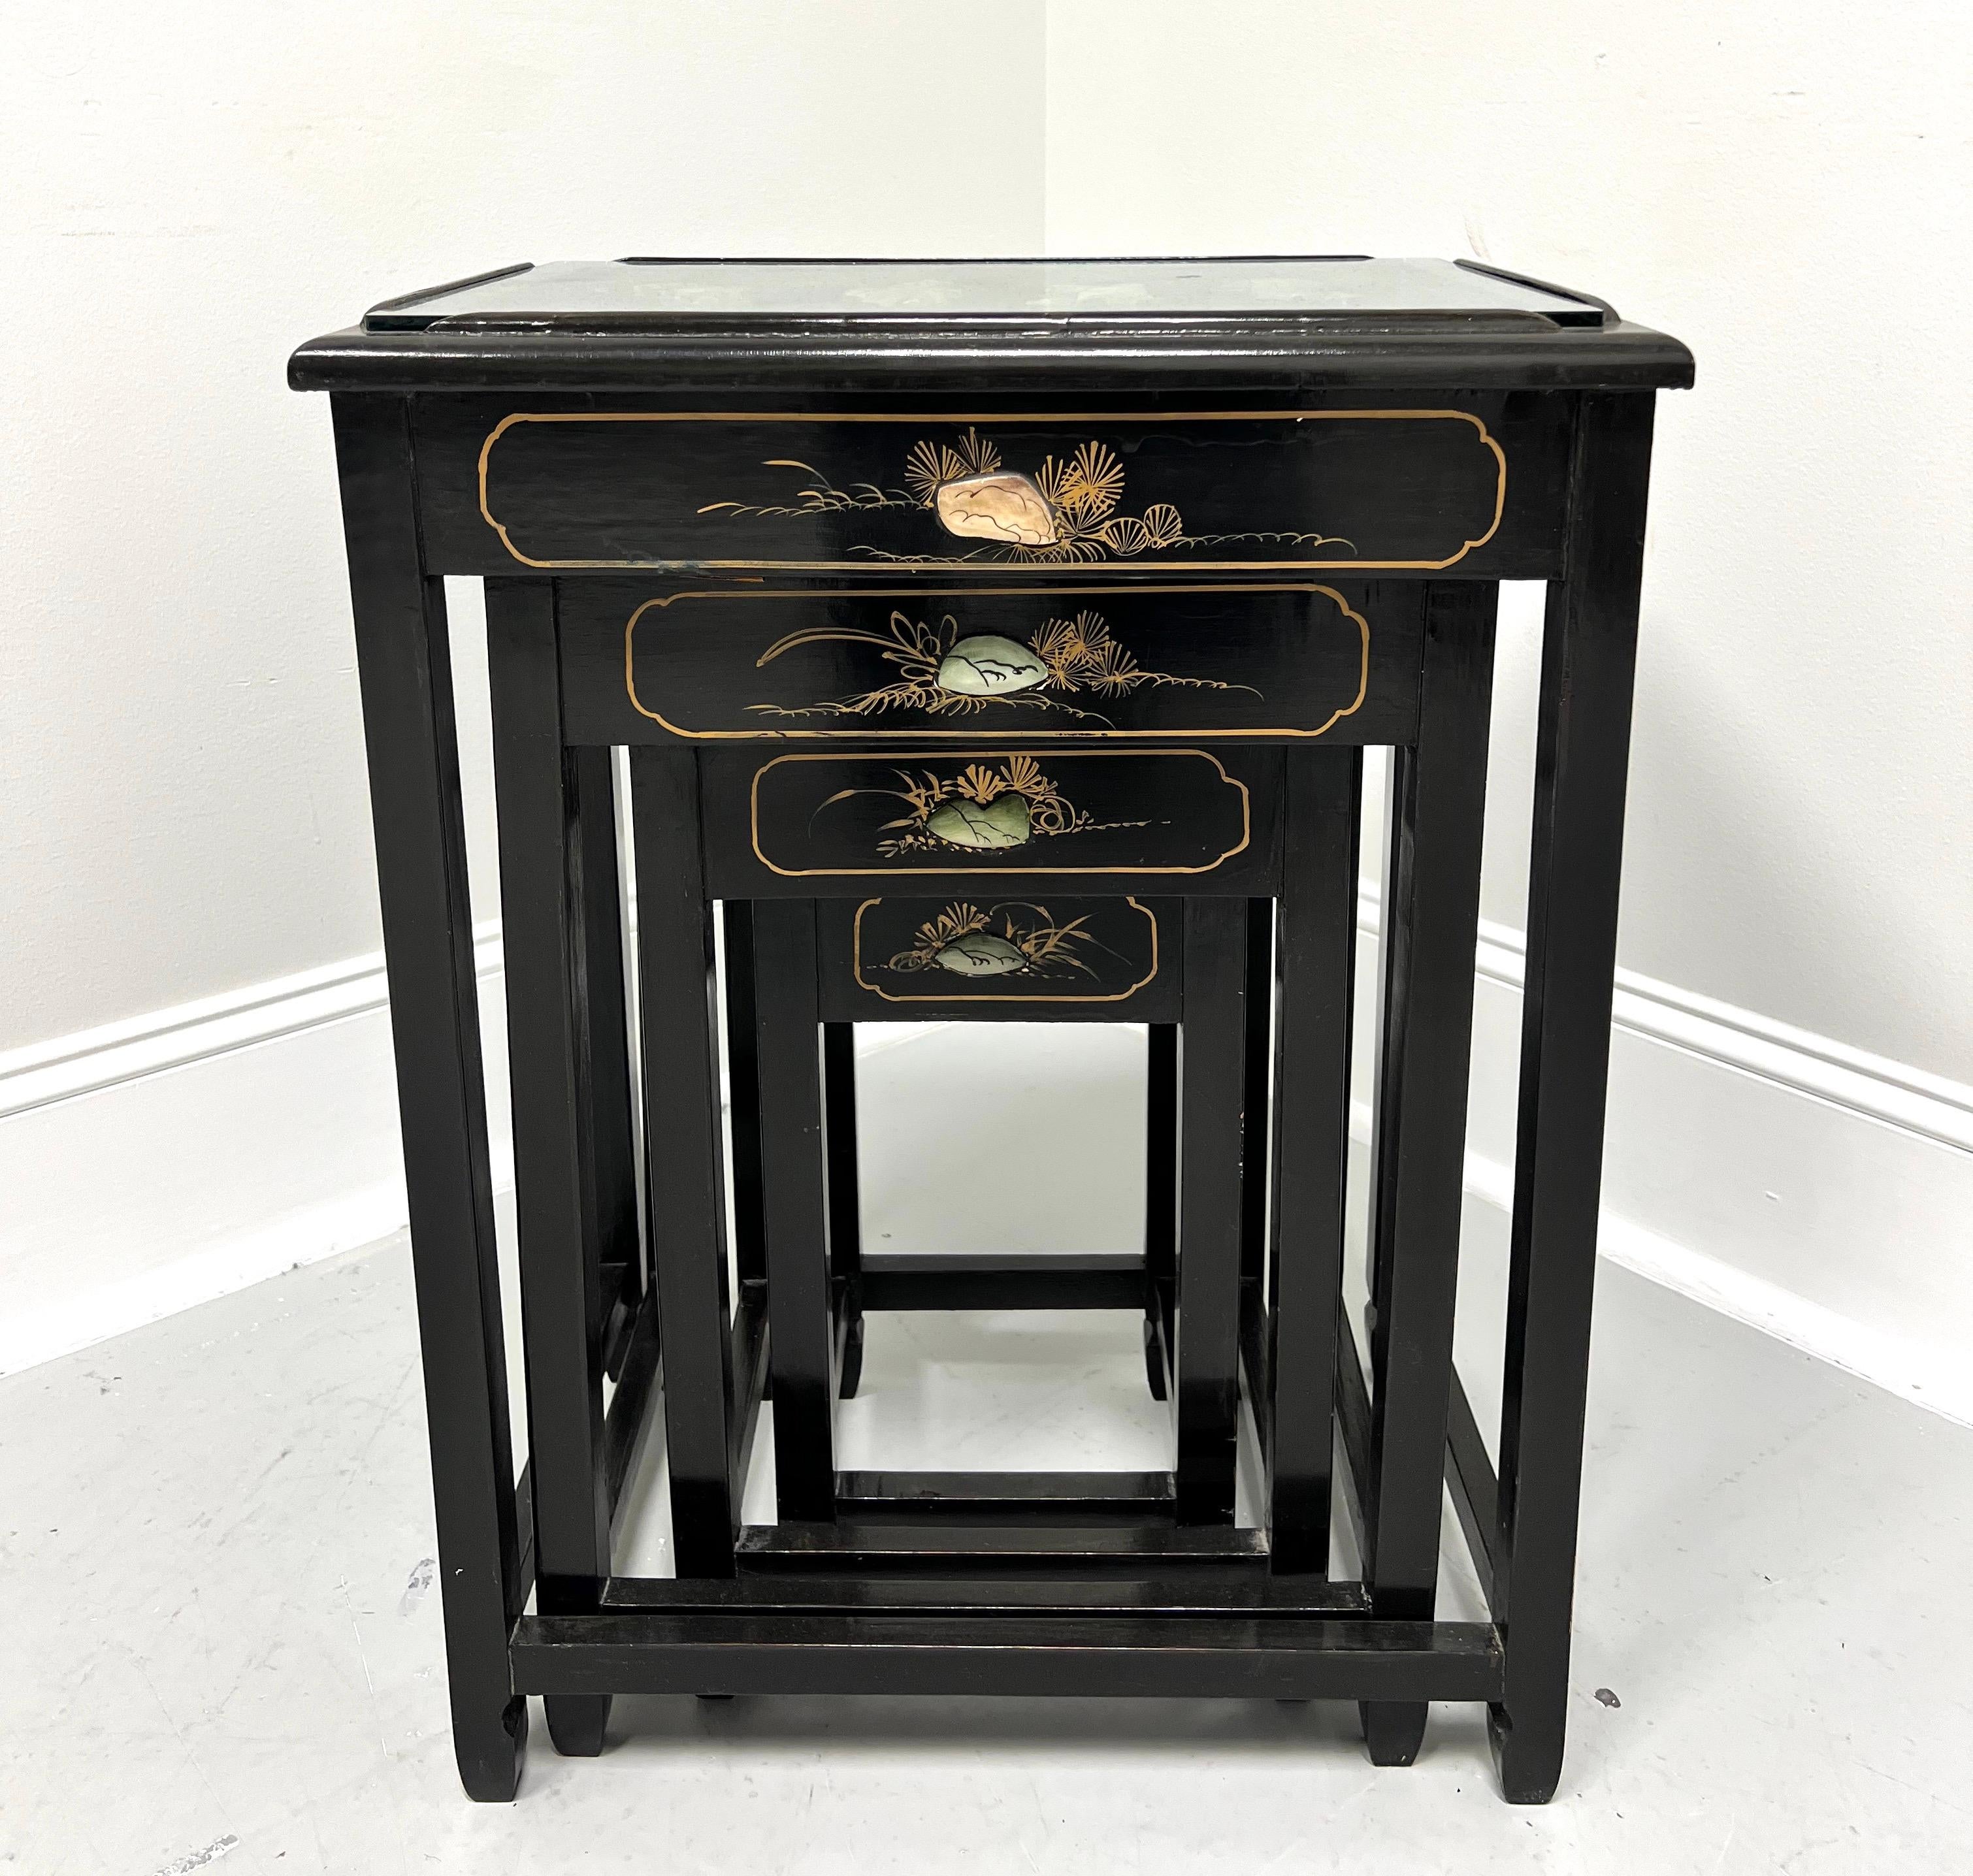 1980's Chinese Export Black Lacquer Hand Painted Nesting Tables - Set of 4 For Sale 1